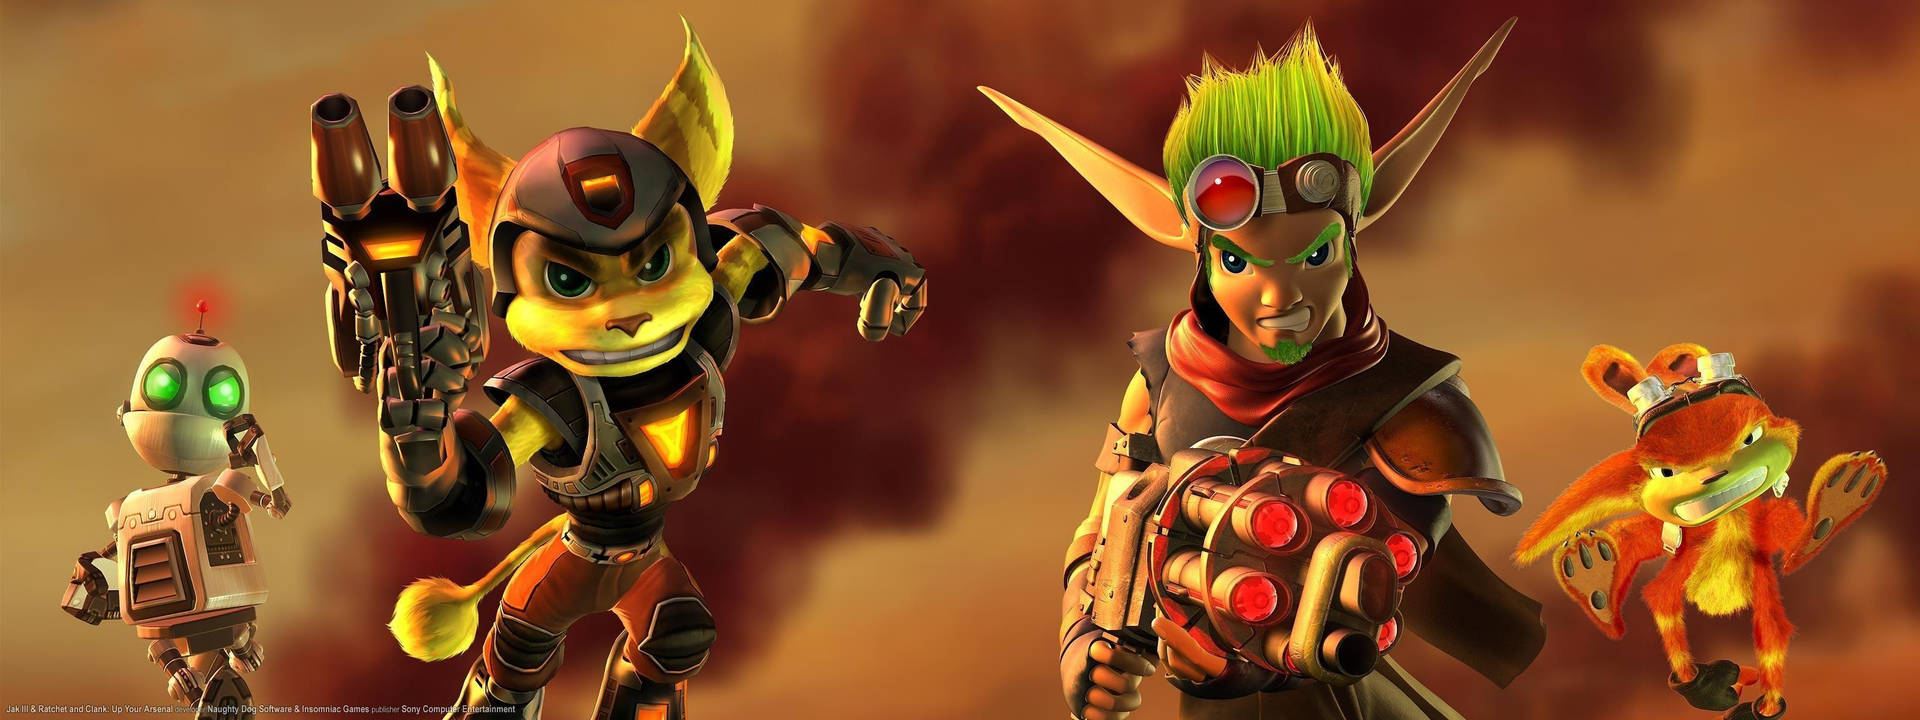 Jak and Daxter join forces in a thrilling adventure Wallpaper